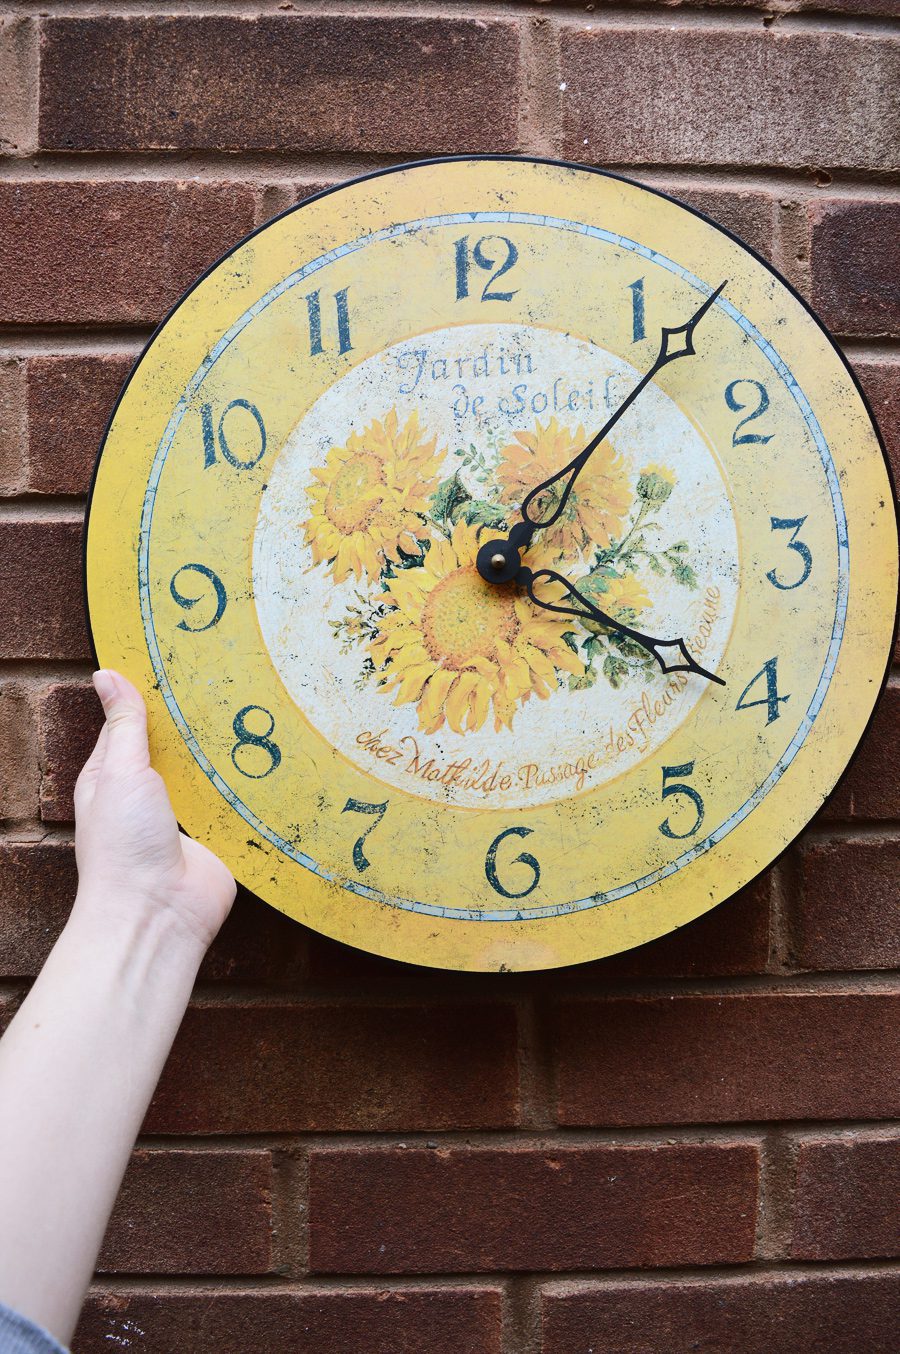 DIY modern wall clock makeover craftingfingers.co.uk #RustOleum #upcycling